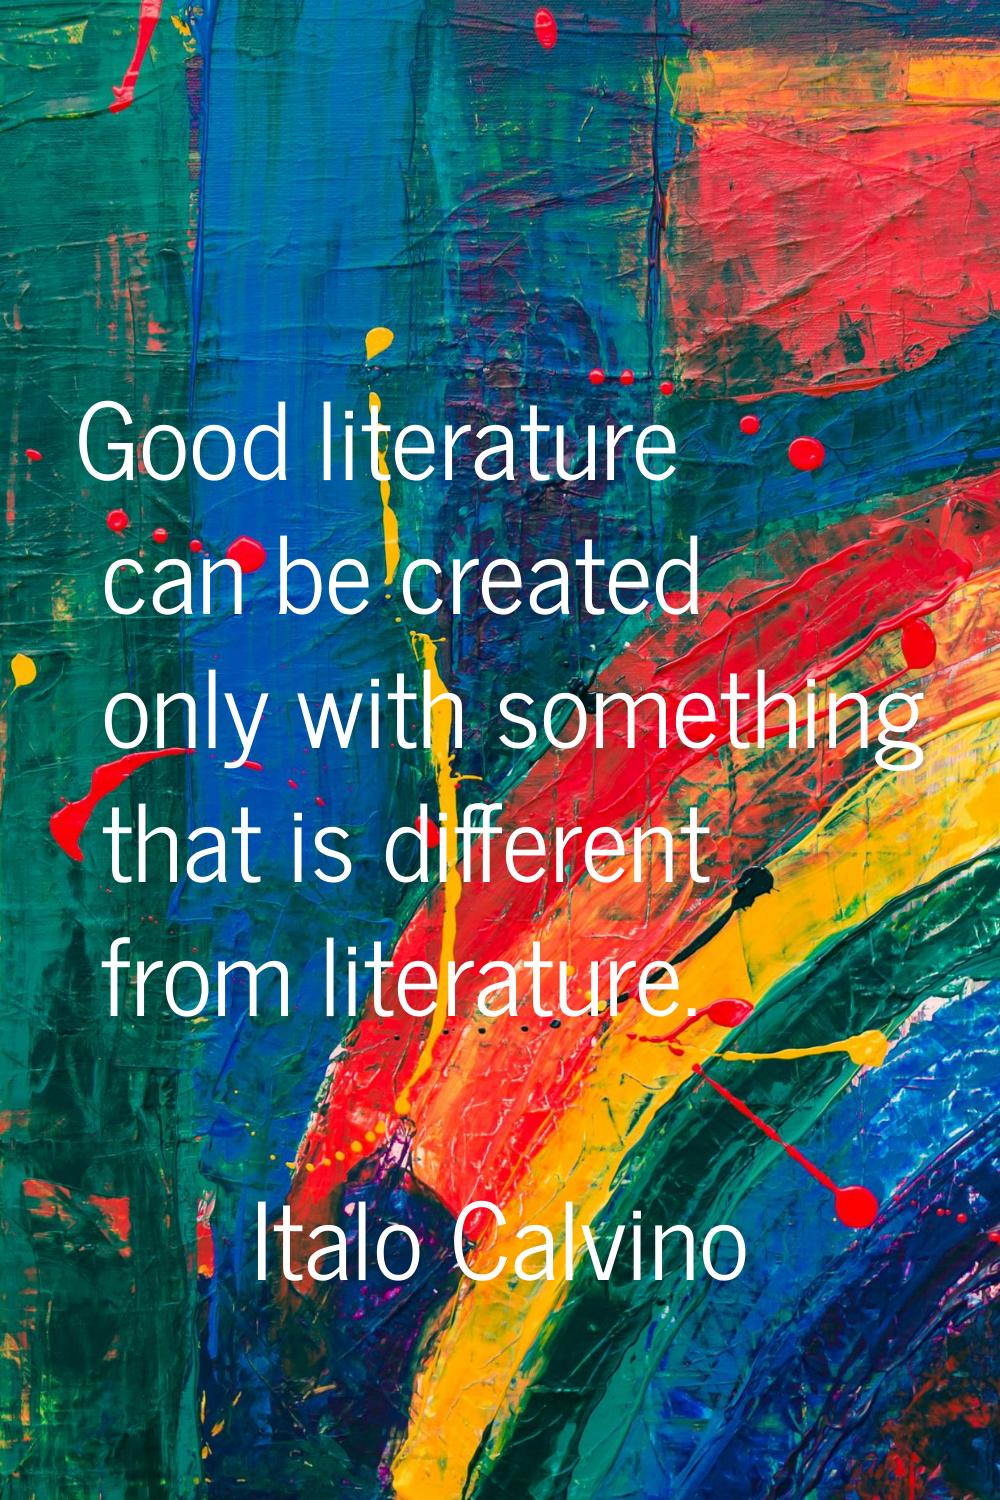 Good literature can be created only with something that is different from literature.